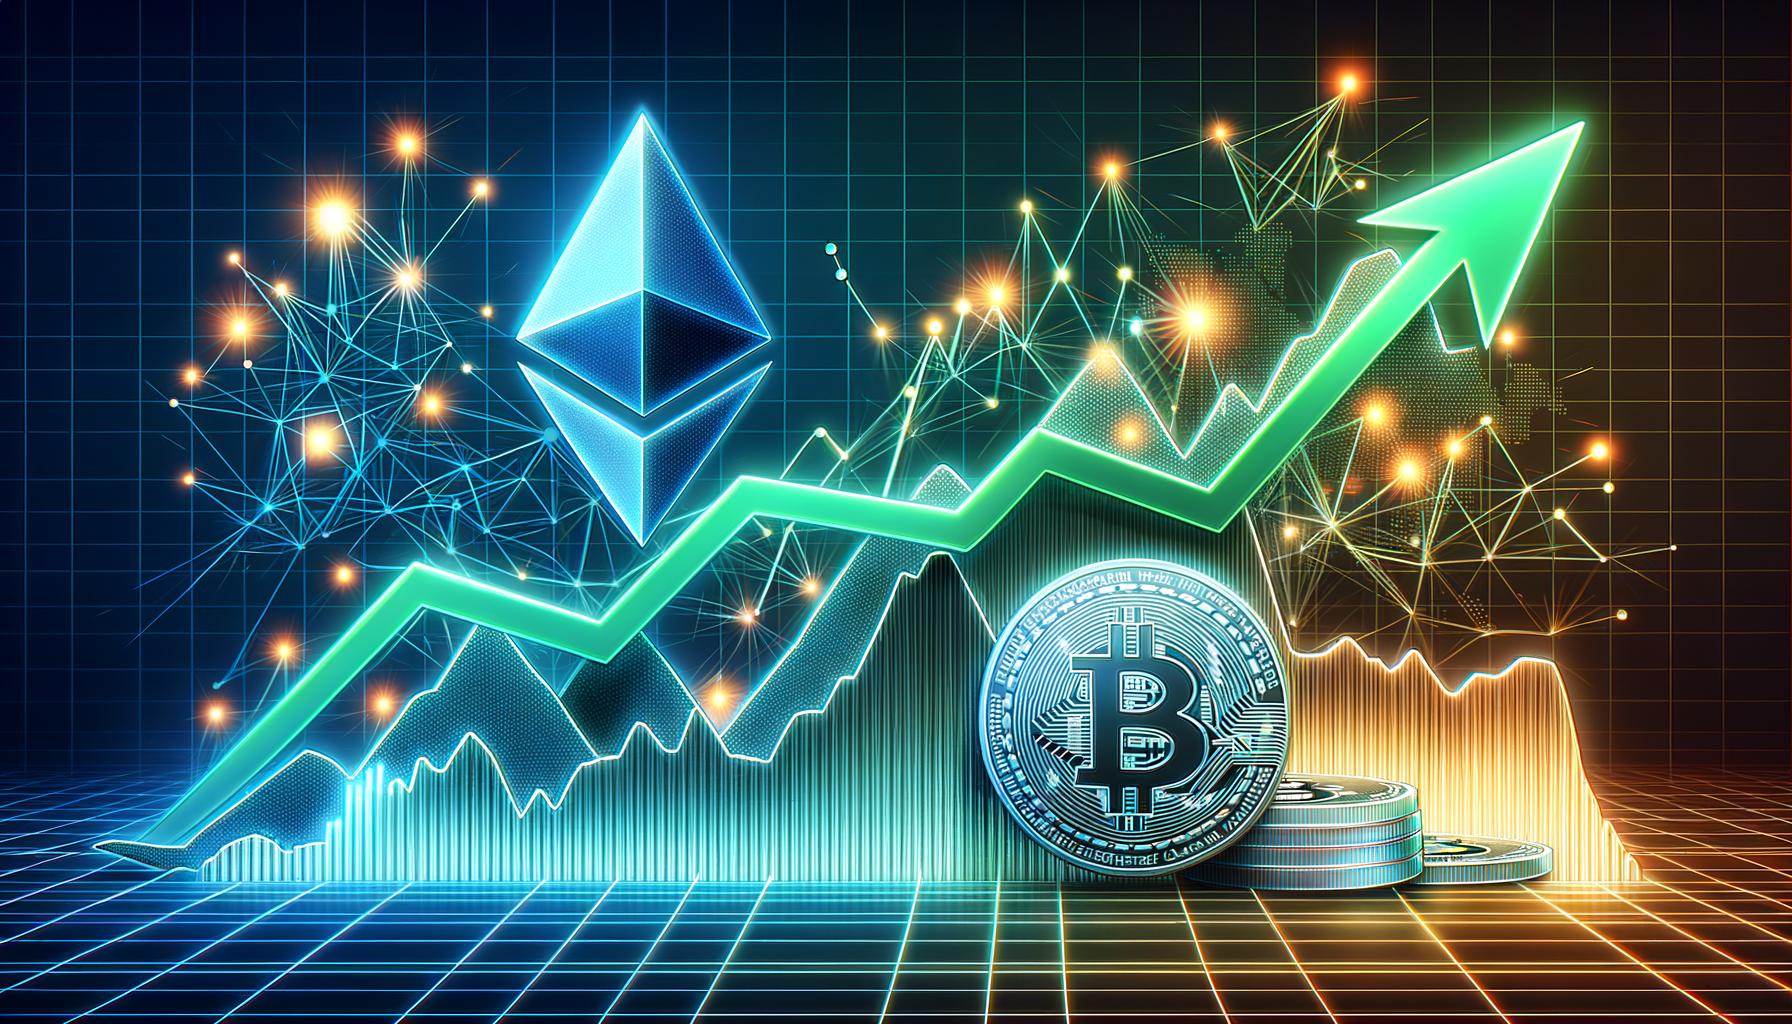 Ethereum On The Rise and Outperforms Bitcoin: Signals Indicate Fresh Increase